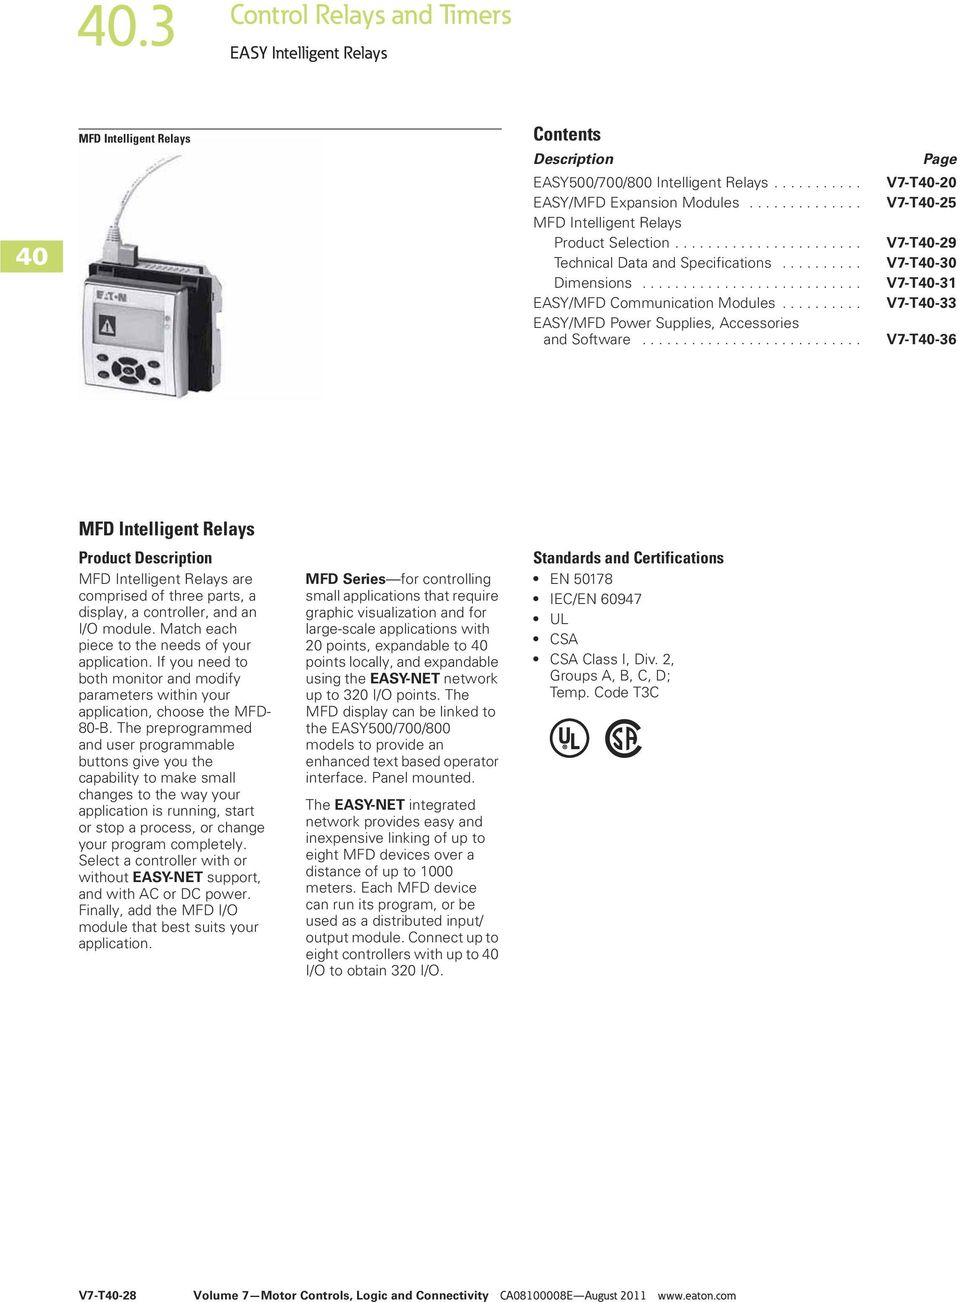 .......................... Page V7-T-20 V7-T-25 V7-T-29 V7-T-30 V7-T-31 V7-T-33 V7-T-36 MFD Intelligent Relays Product MFD Intelligent Relays are comprised of three parts, a display, a controller, and an I/O module.